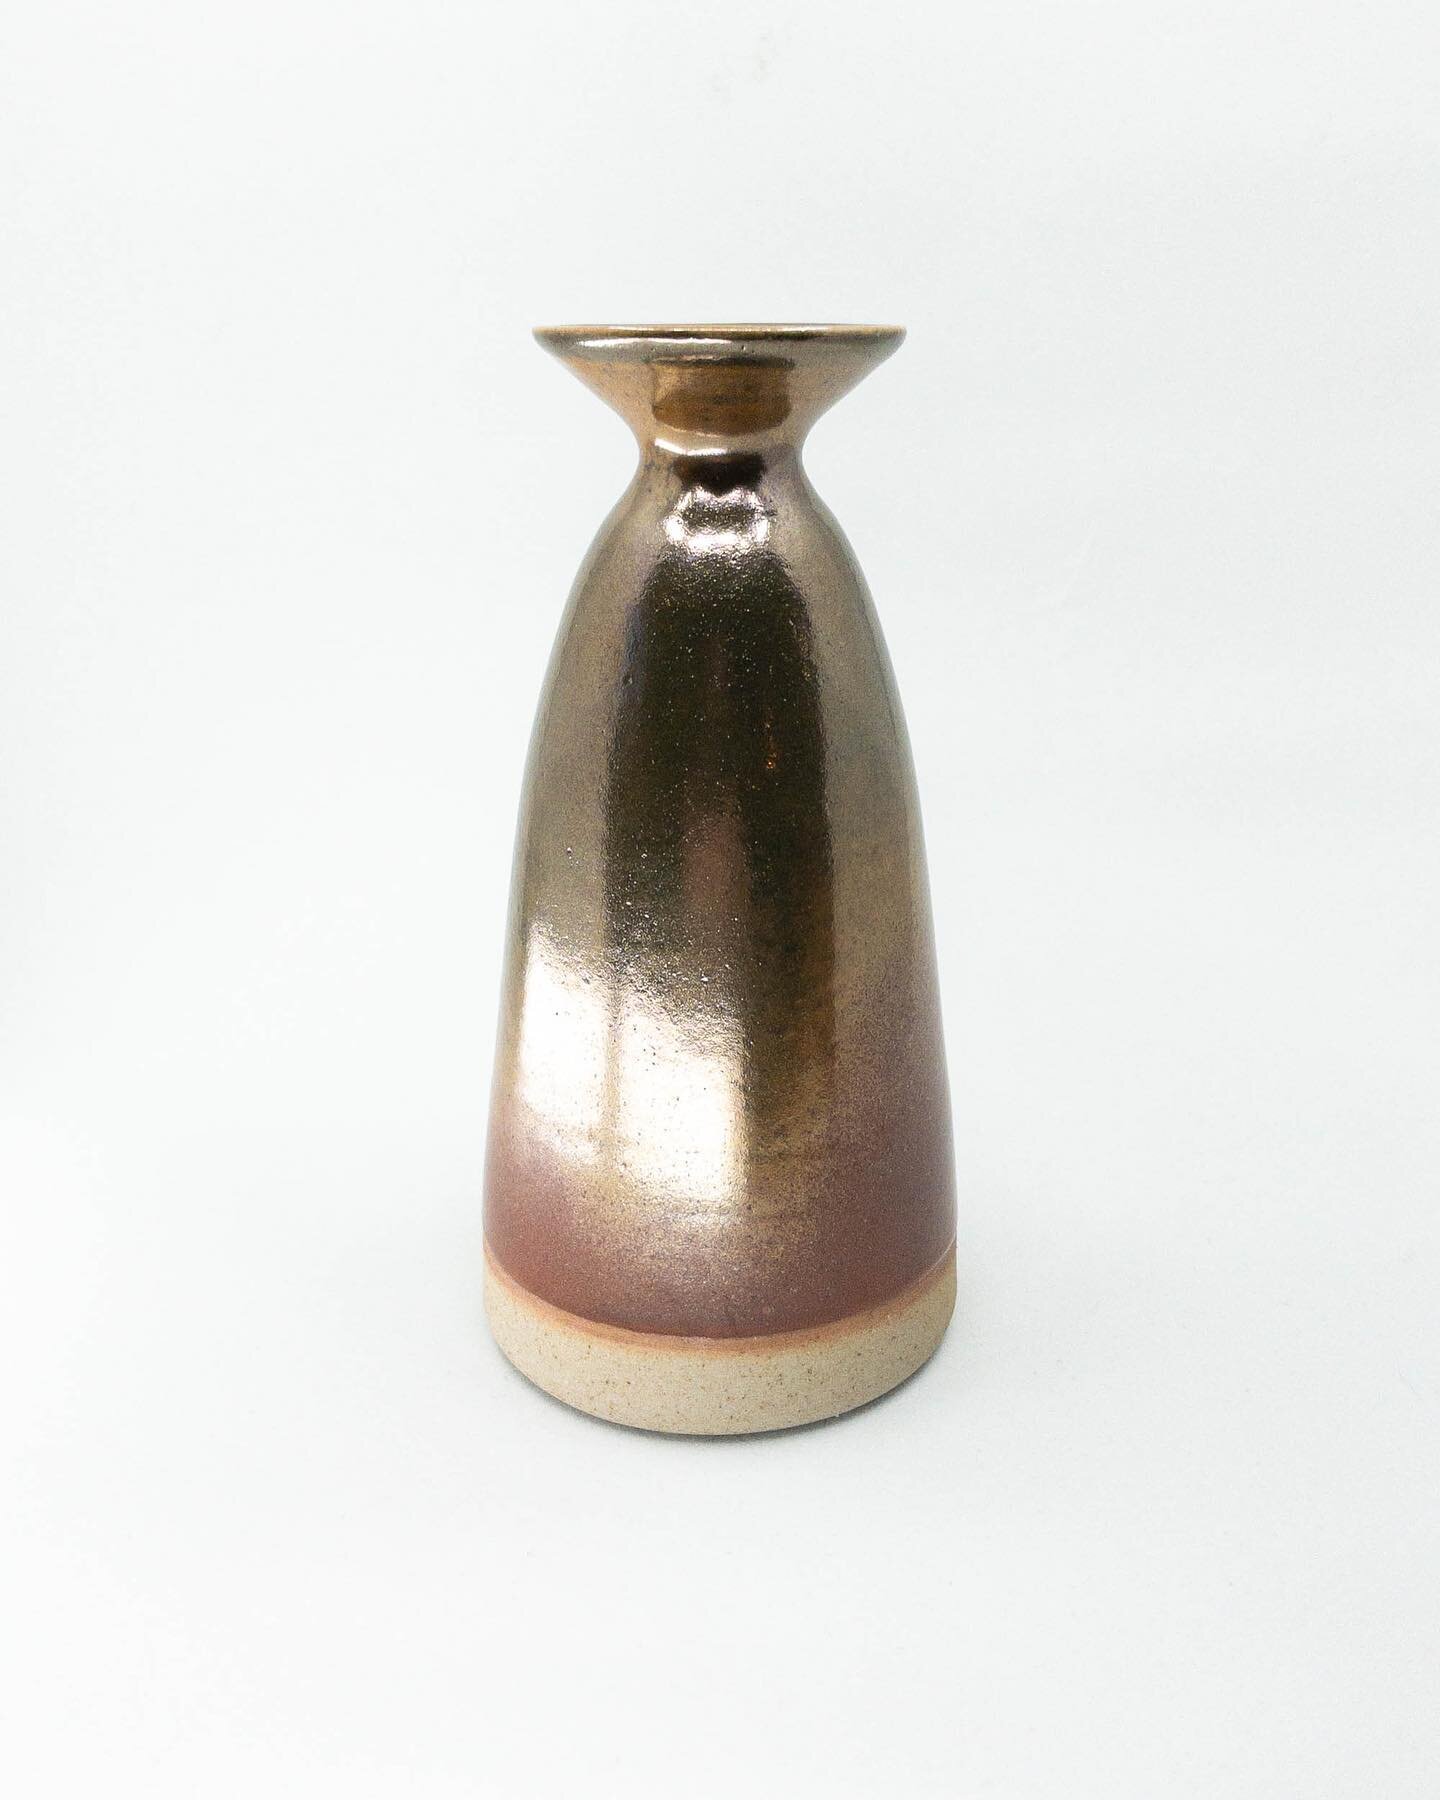 Mum&rsquo;s Vase. Made from a light stoneware with a metallic gold-red shino glaze, reduction fired to cone 10. So shiny.
.
.
.
.
.
#pottery #ceramics #handmade #vase #reductionfired #wheelthrown #clay #stoneware #wheelthrownceramics #metallic #shiny